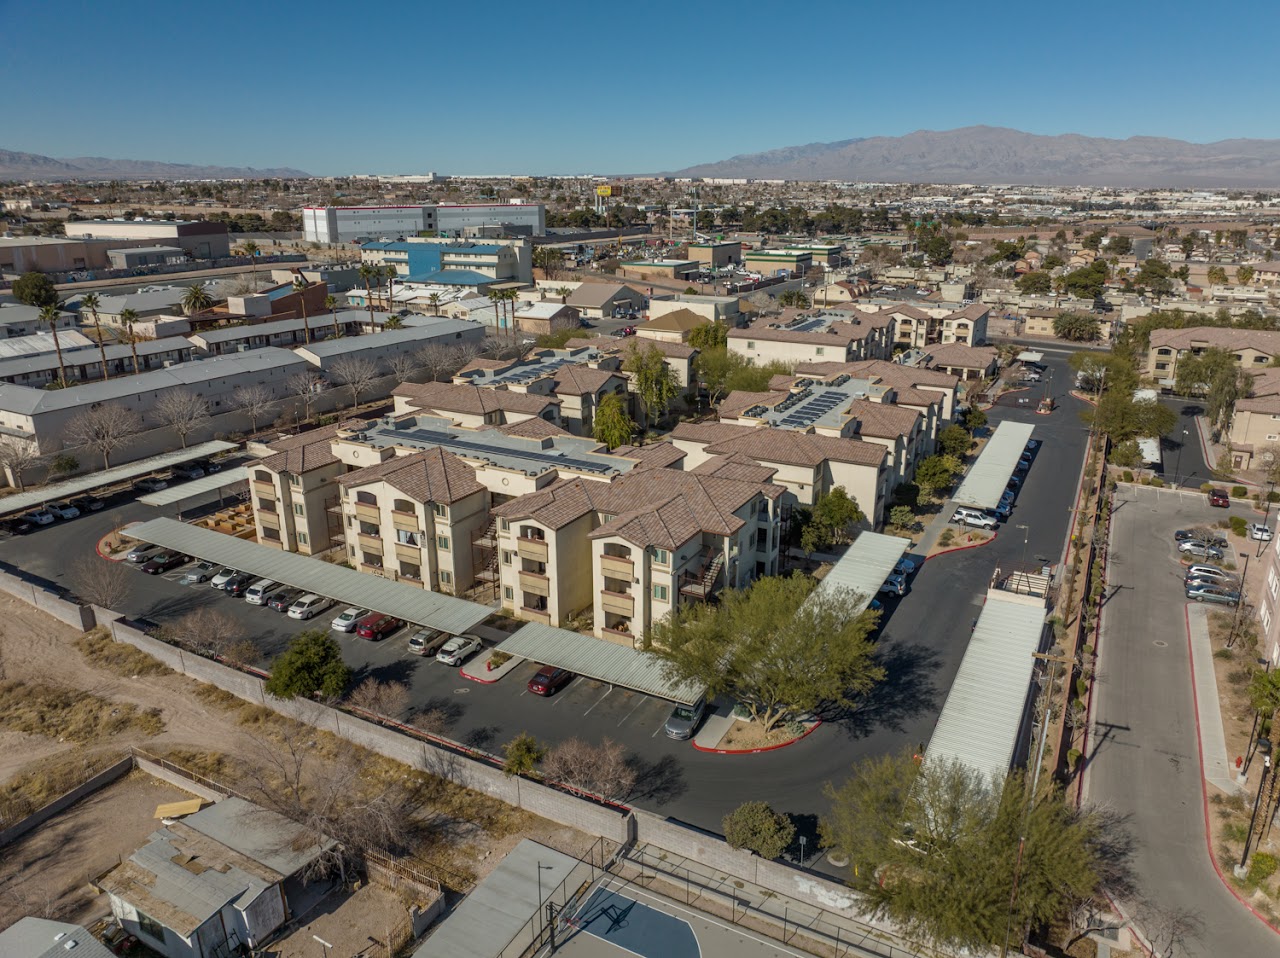 Photo of SKY VIEW PINES APTS at 21 W OWENS AVE LAS VEGAS, NV 89030